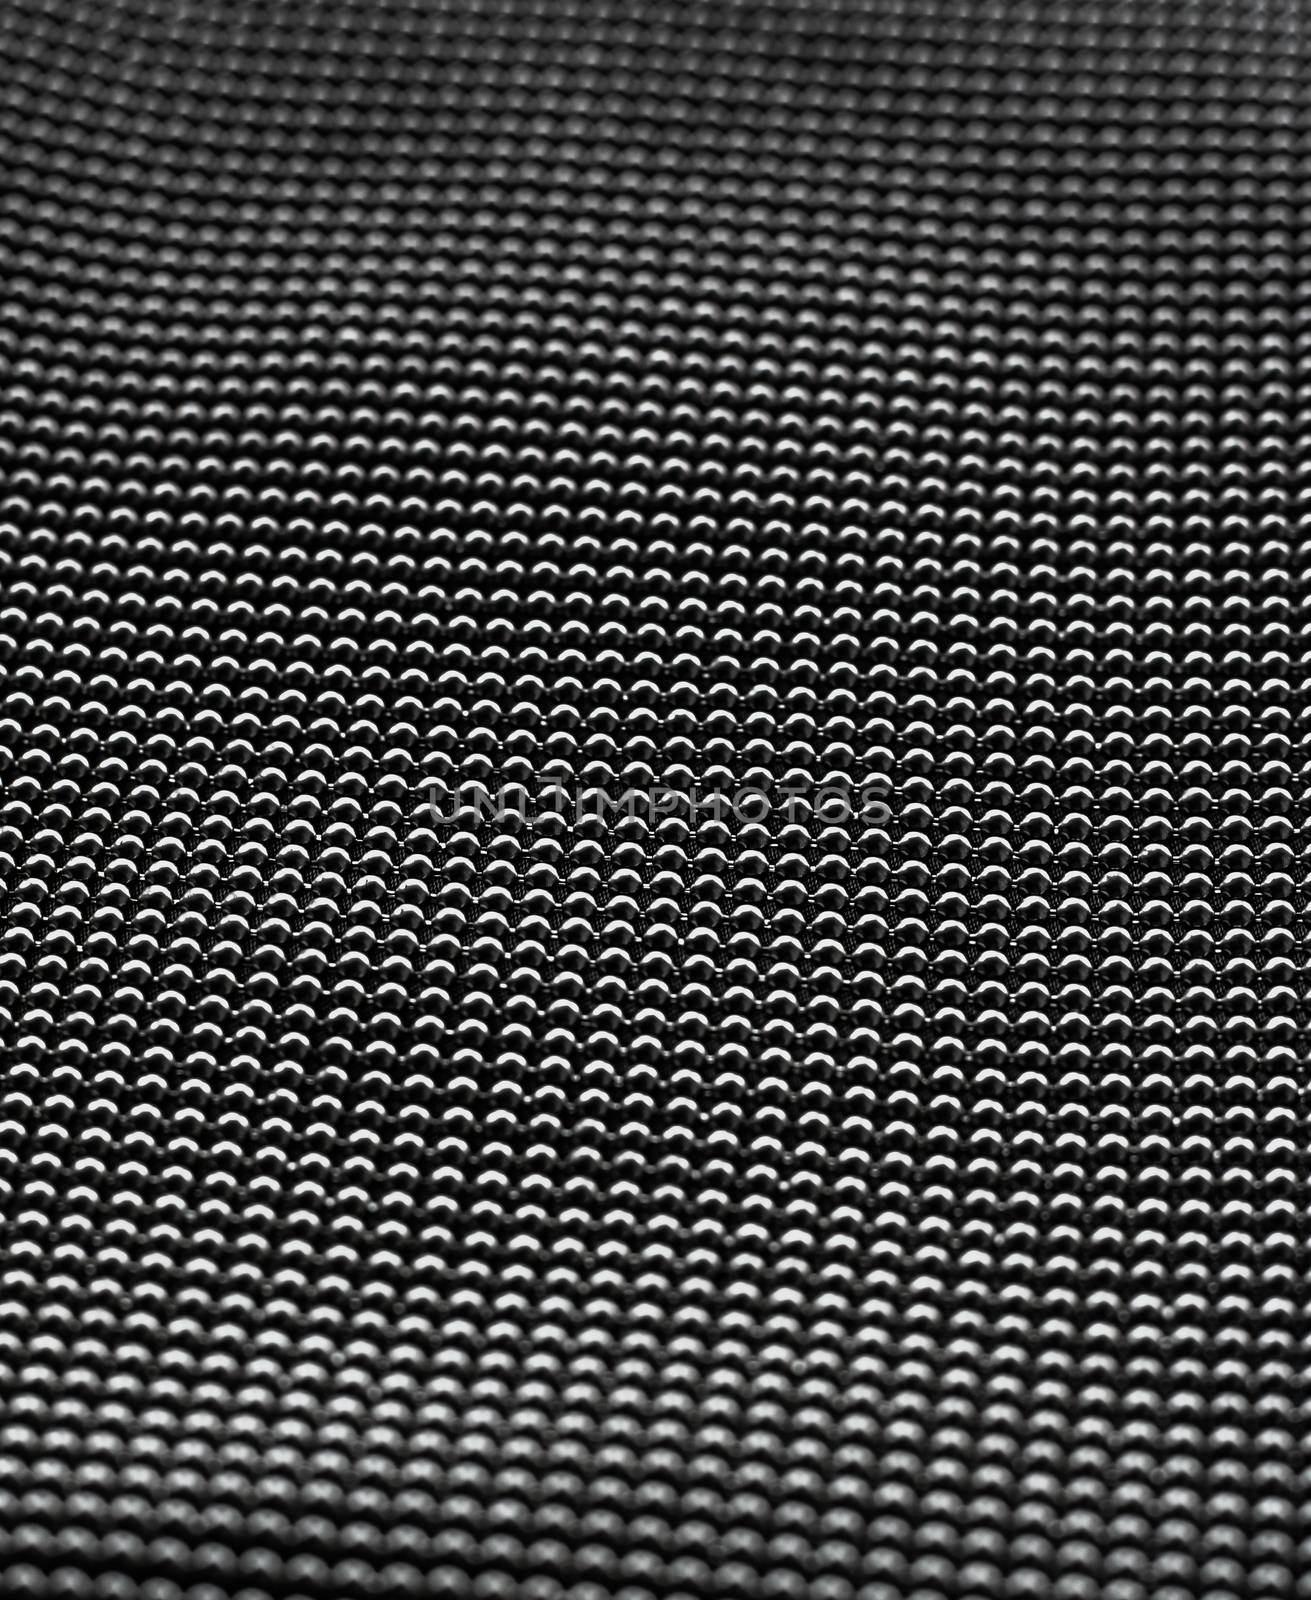 Black metallic abstract background, futuristic surface and high tech materials